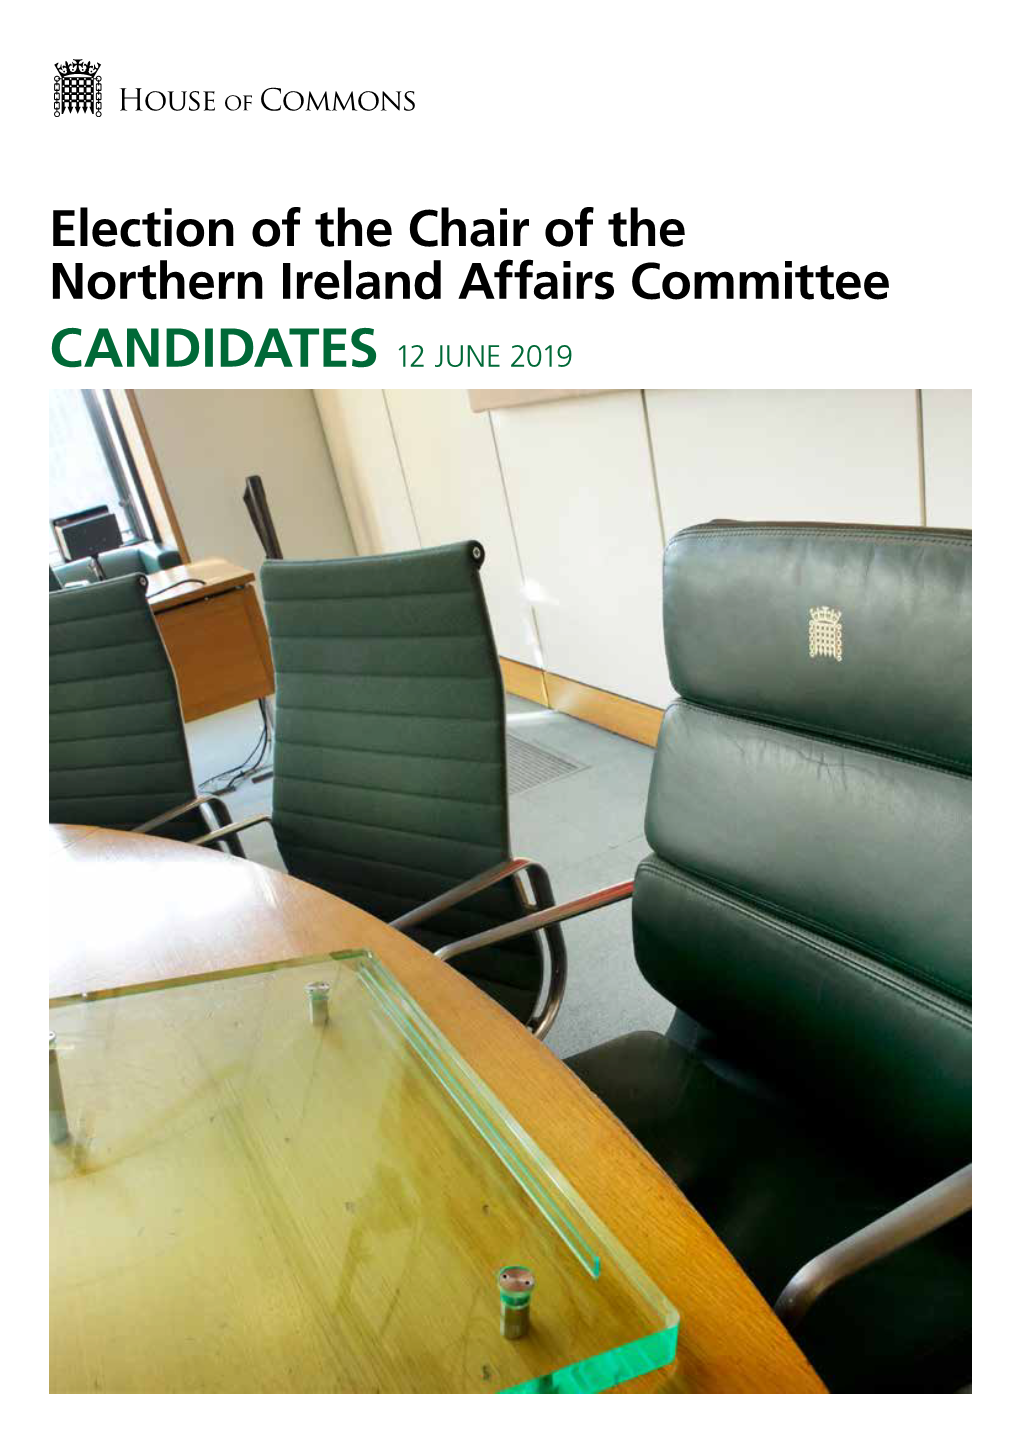 Election of the Chair of the Northern Ireland Affairs Committee CANDIDATES 12 JUNE 2019